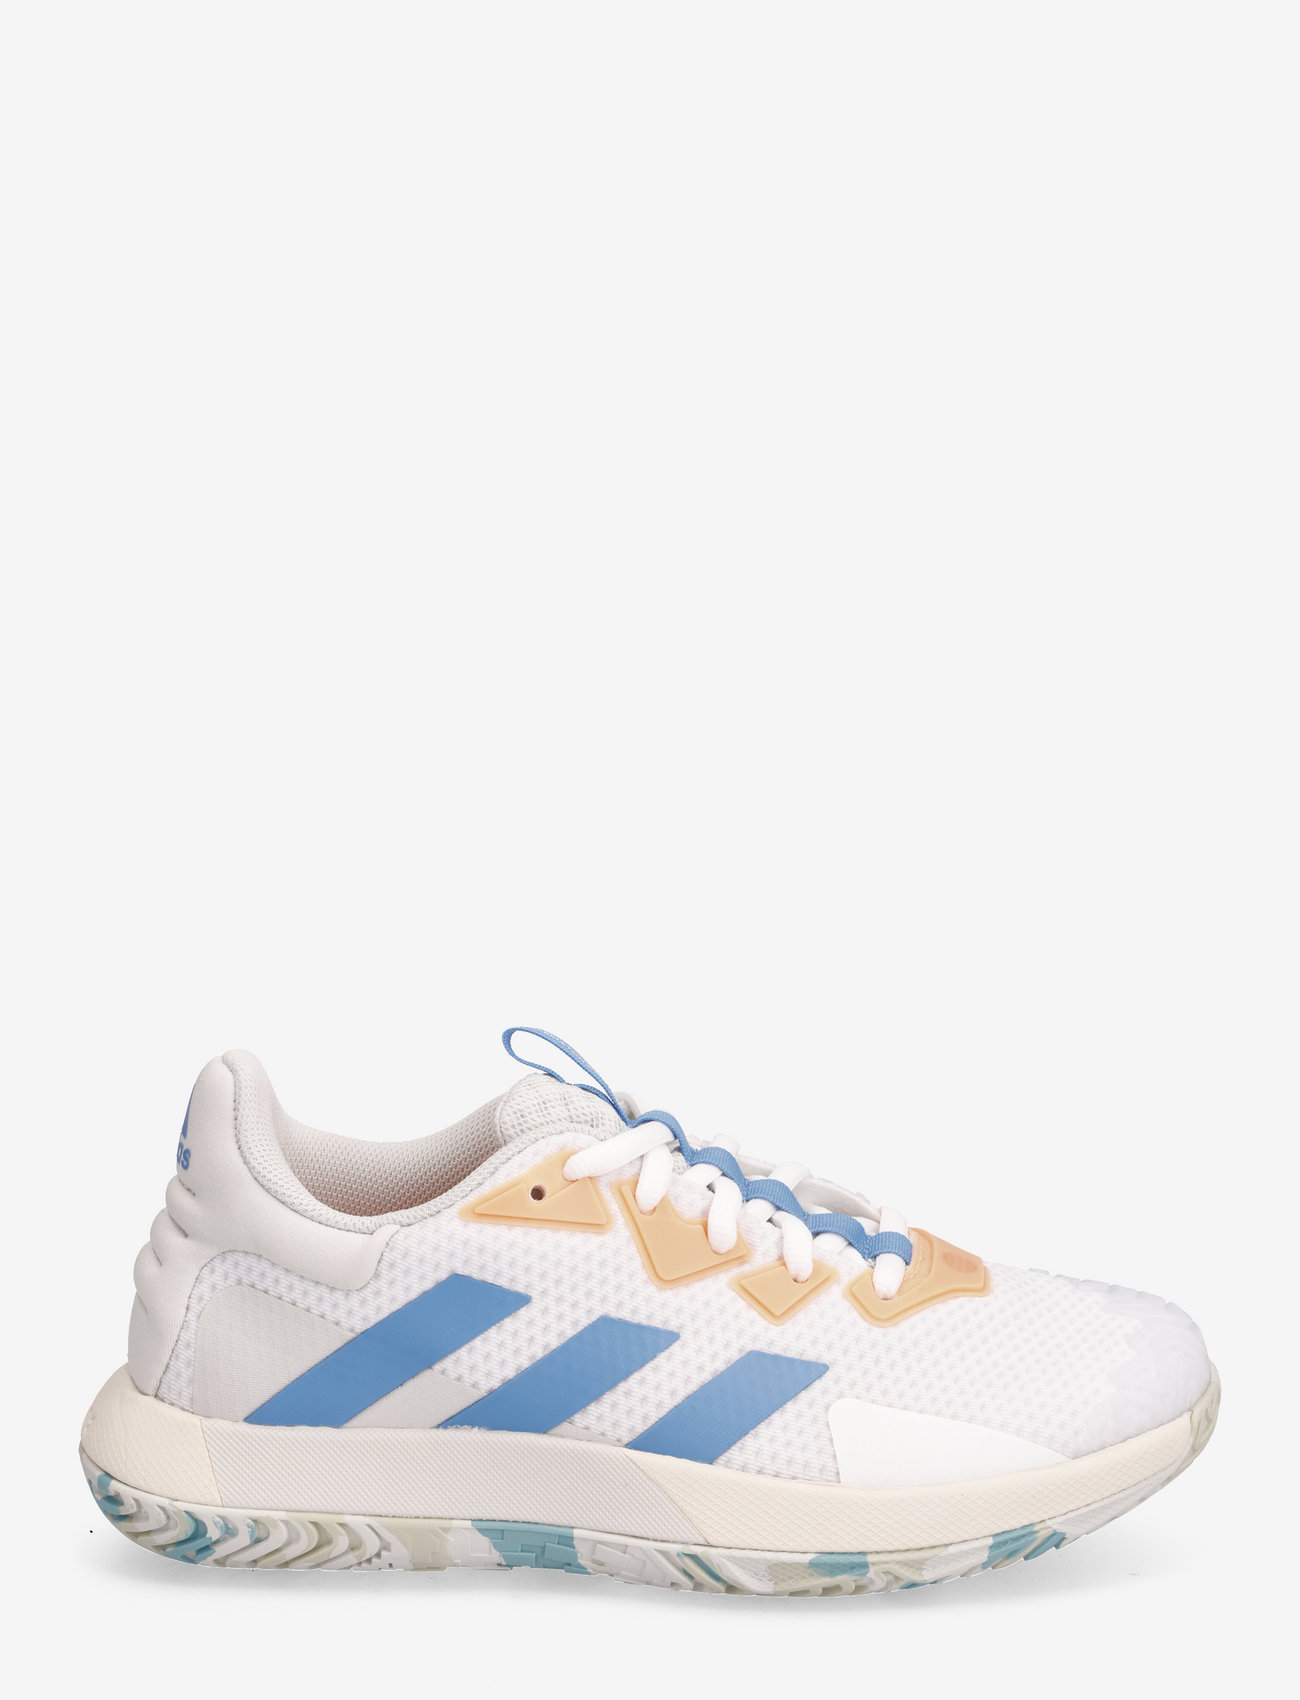 adidas Performance - SoleMatch Control M - racketsports shoes - 000/white - 1